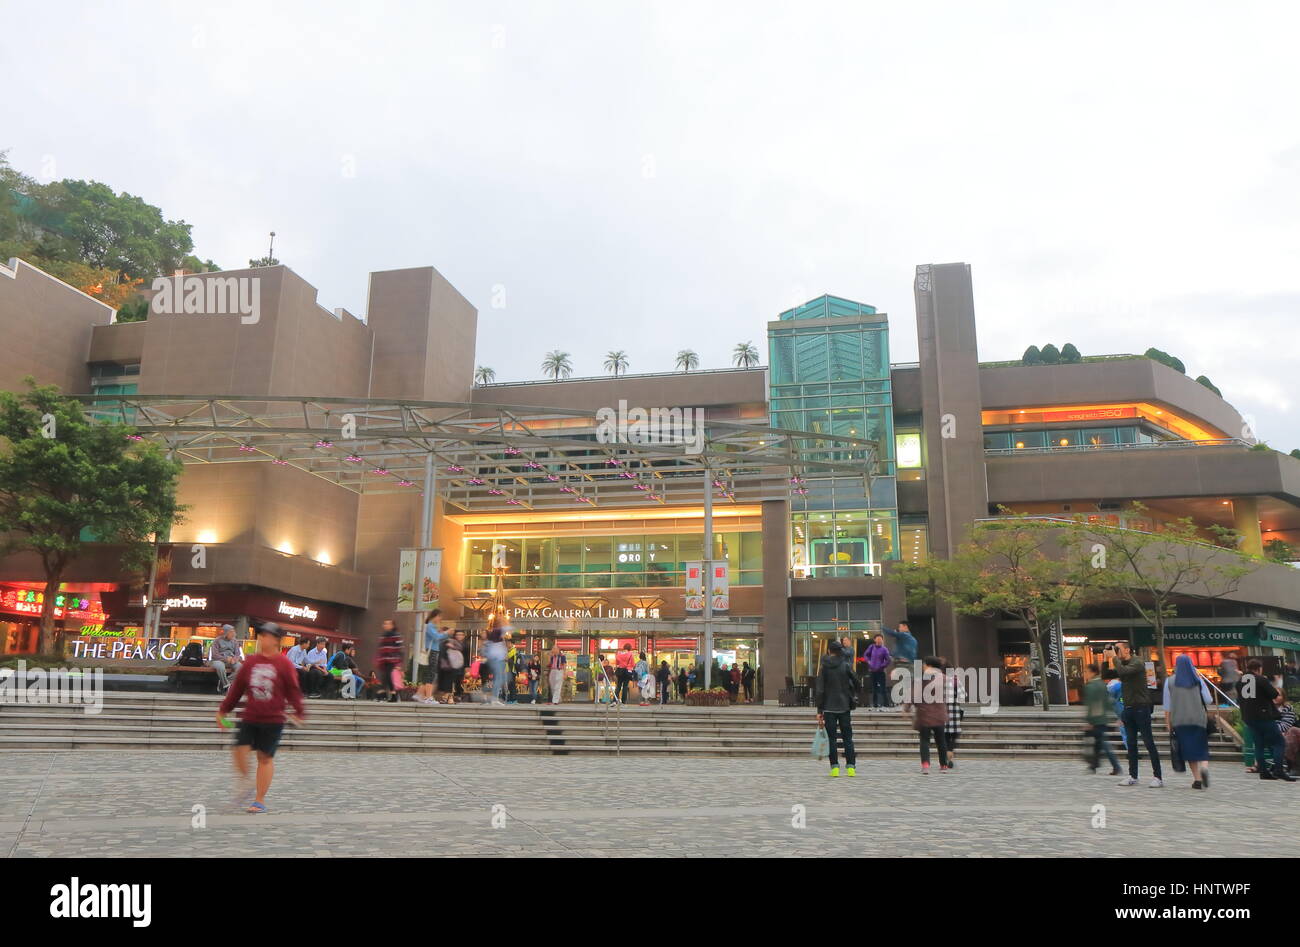 People visit The Peak Galleria in Hong Kong. The Peak Galleria is a leisure and shopping complex located at the summit of Victoria Peak. Stock Photo